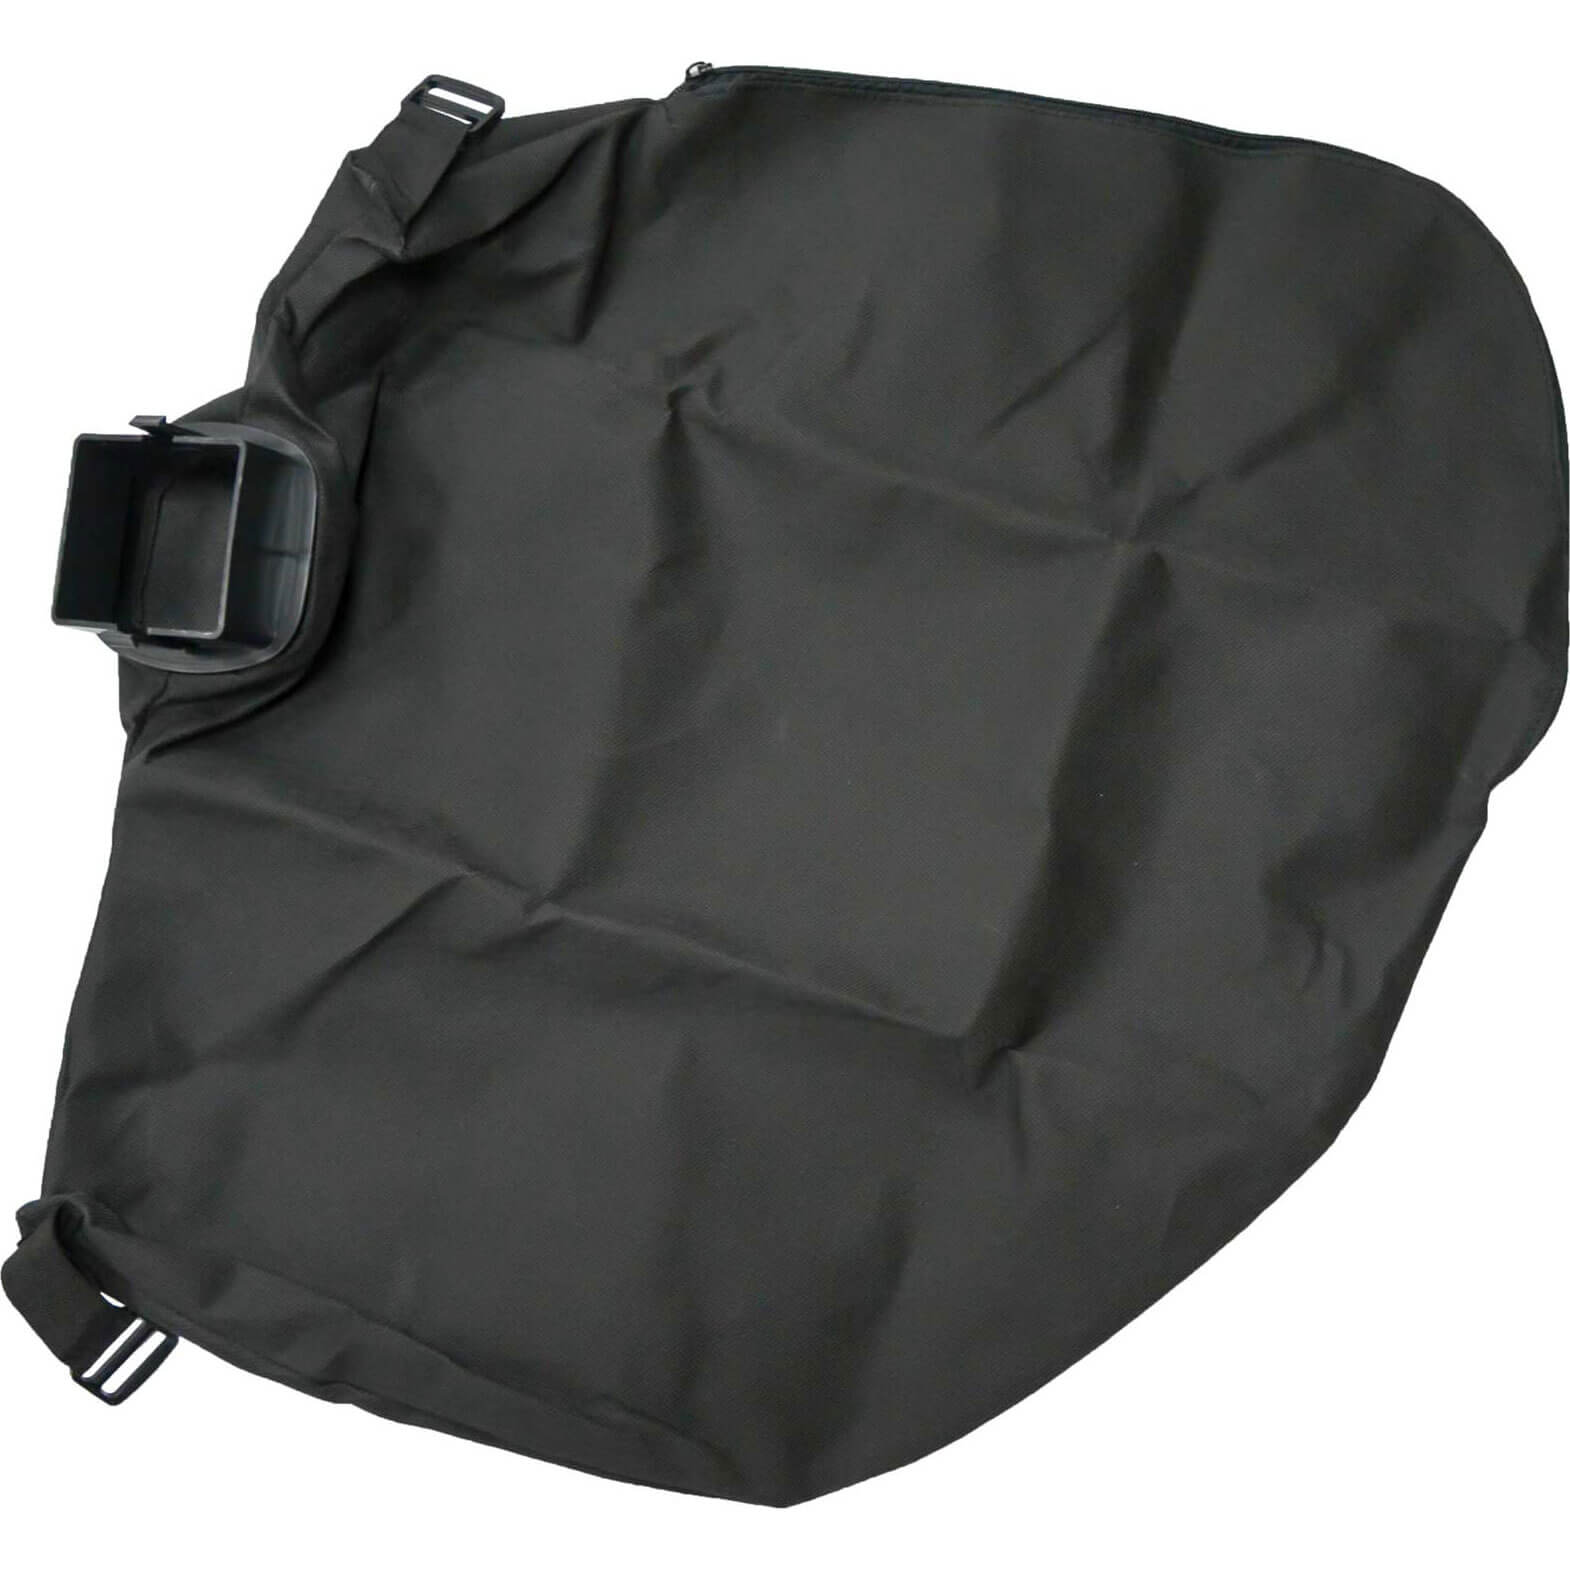 Image of Handy Genuine Leaf Collection Bag for THEV2600 and 3000